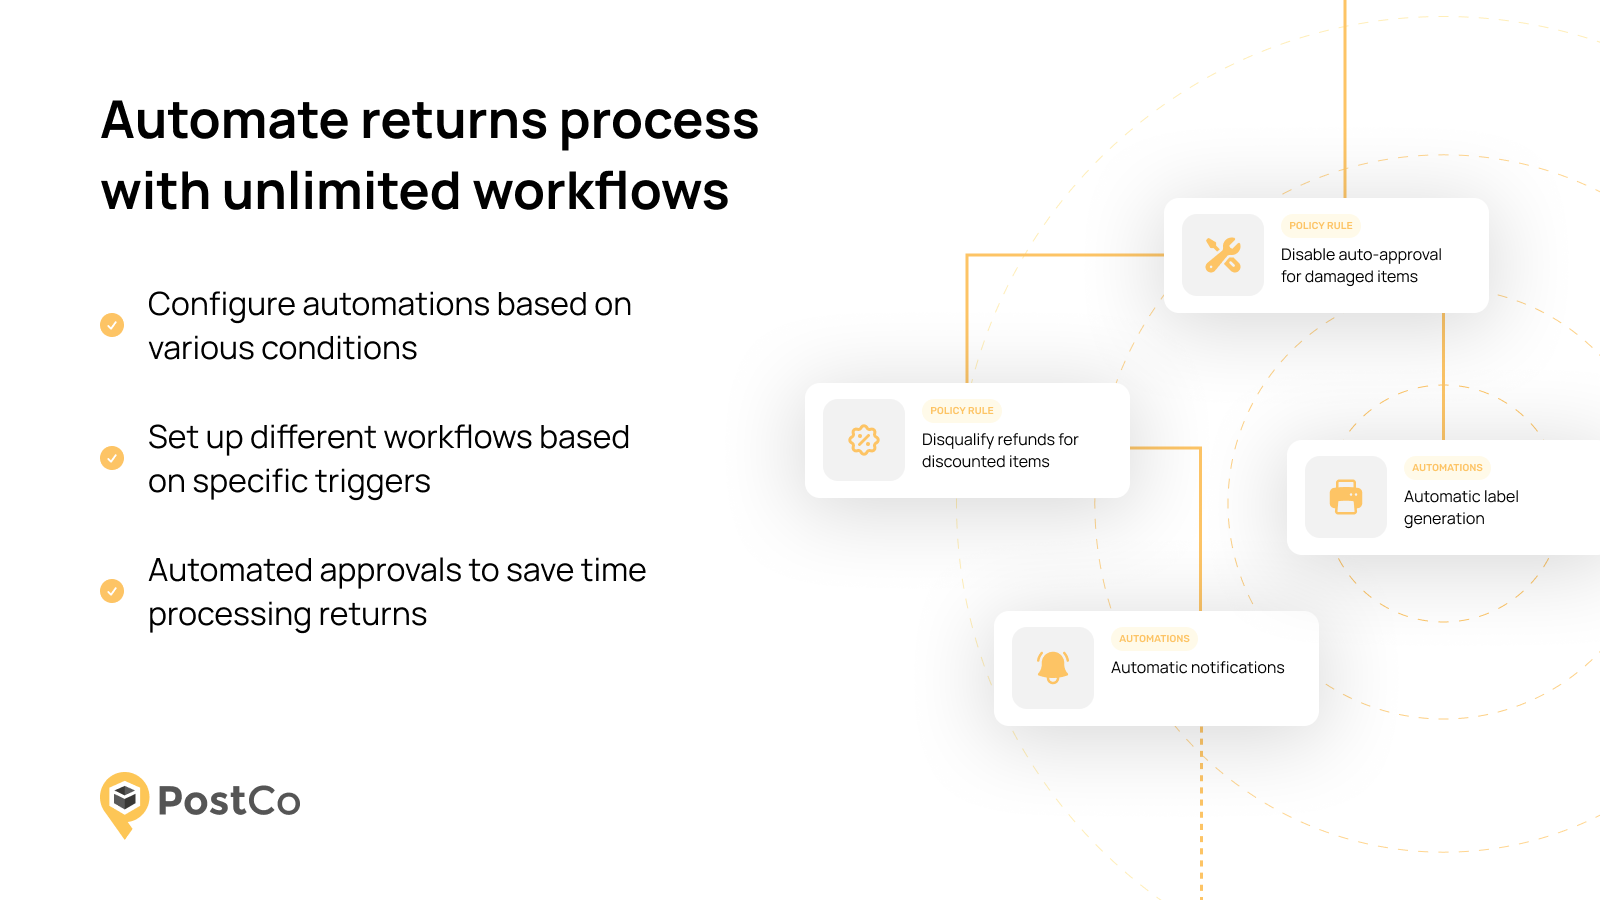 Automate returns processes with unlimited workflows